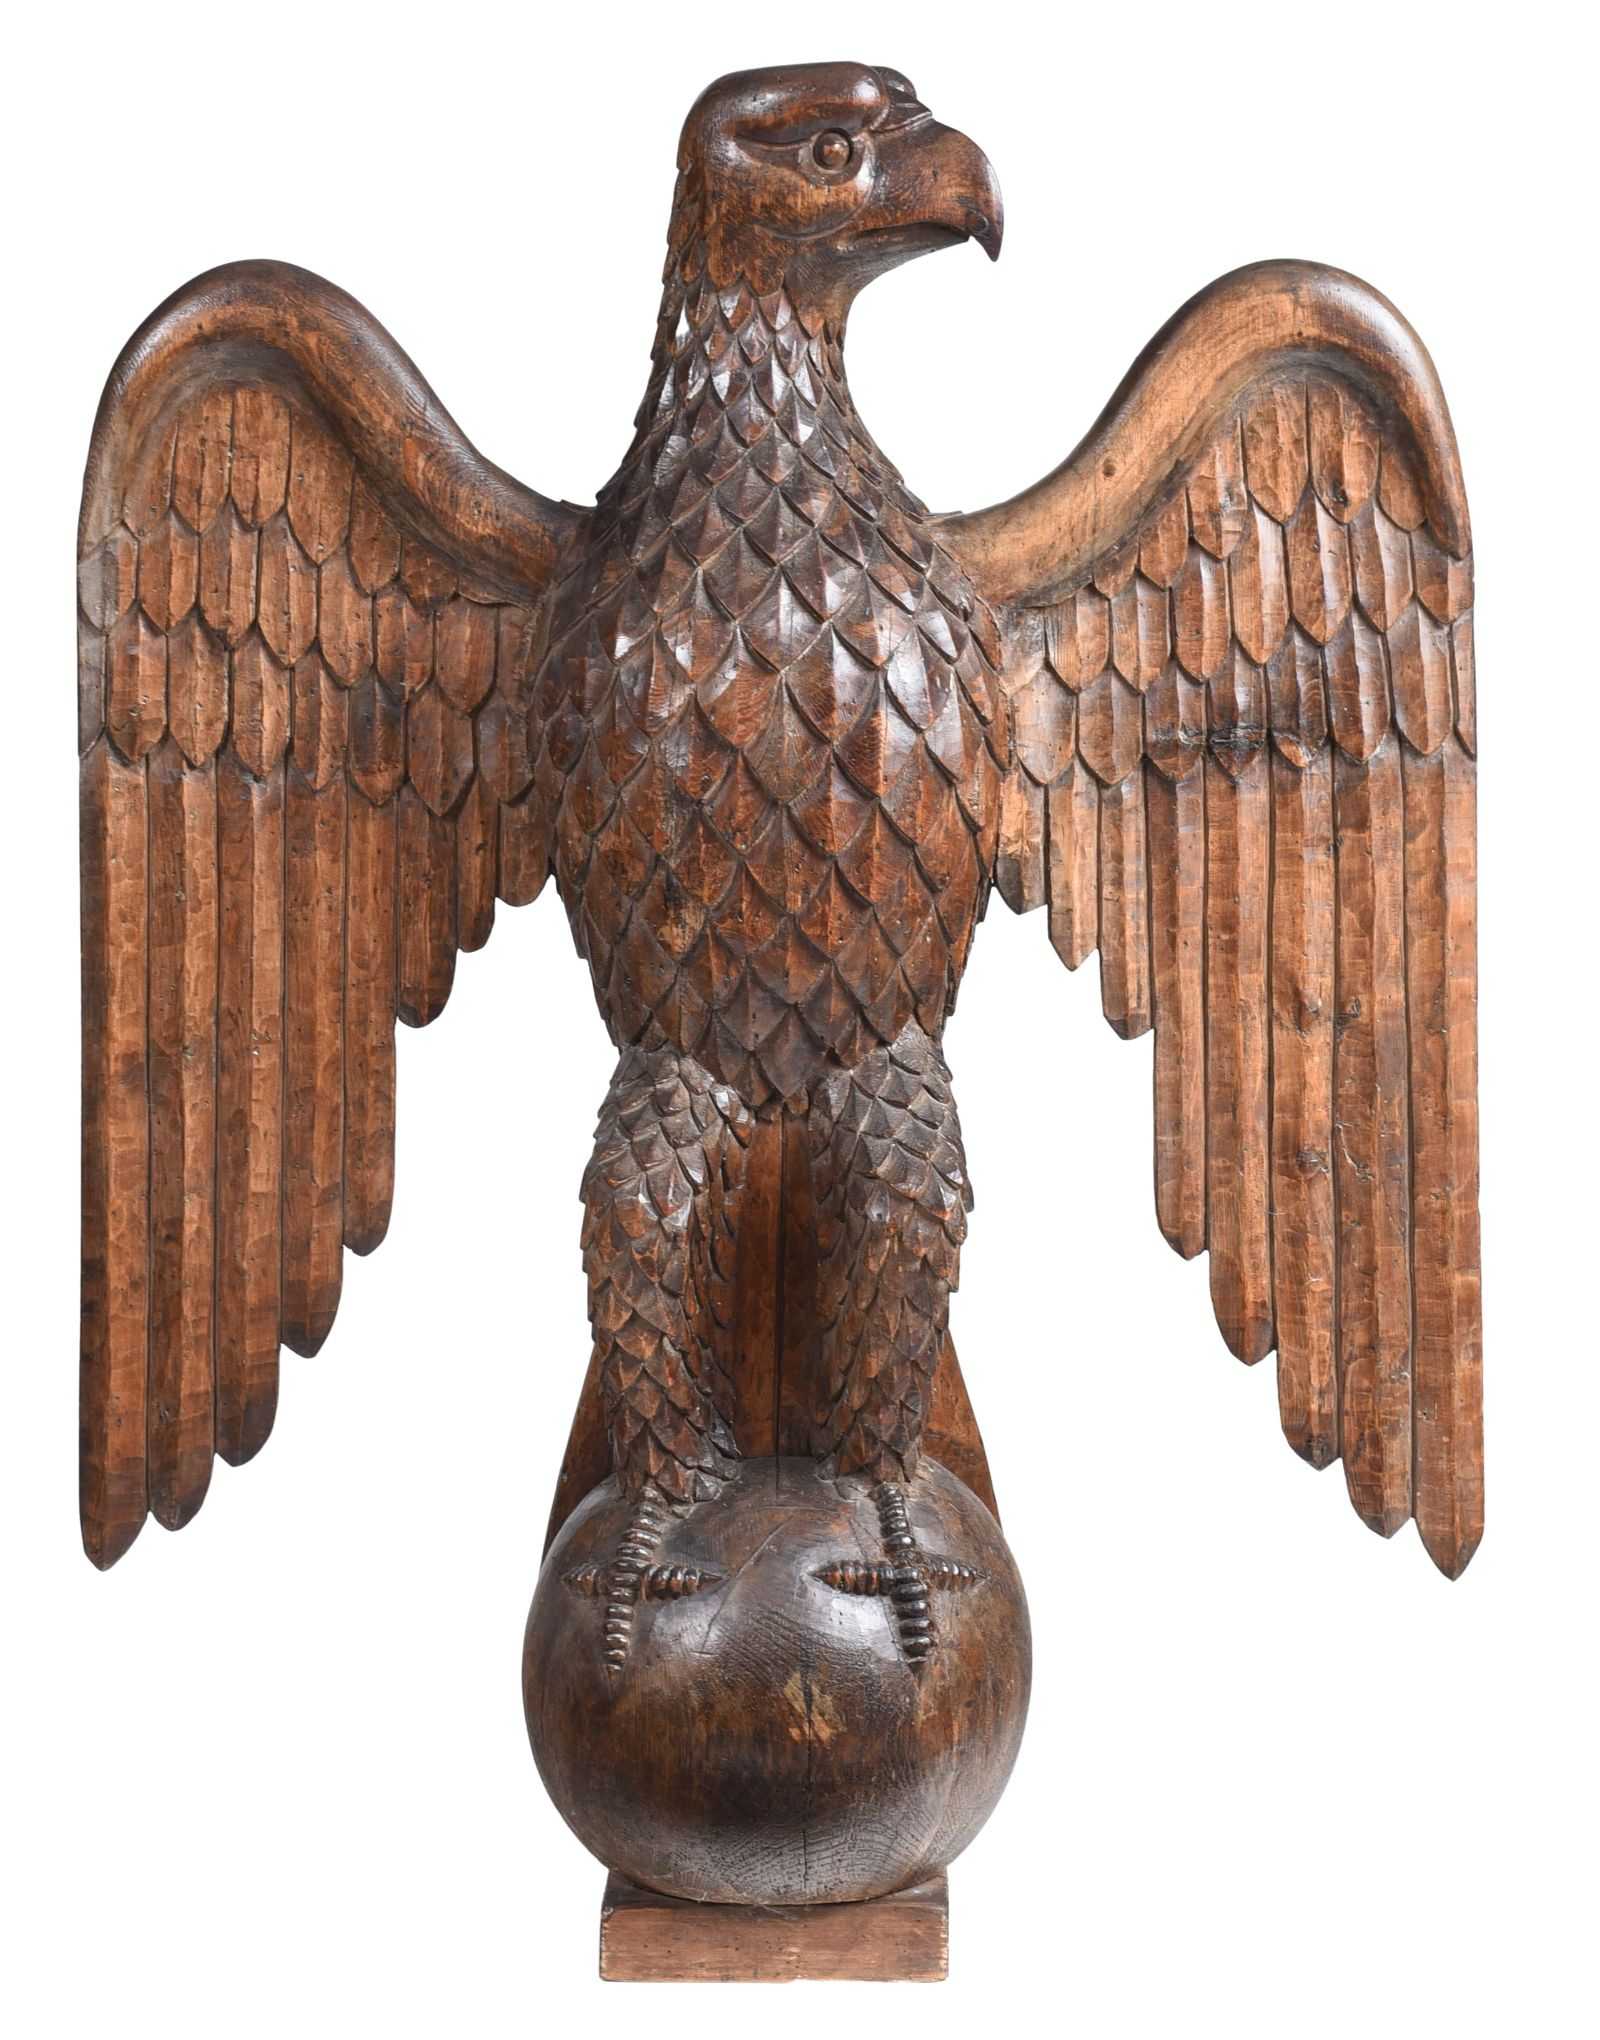 British or American late 19th- or early 20th-century spread-winged eagle carved from pine, estimated at $1,500-$2,500 at Brunk.